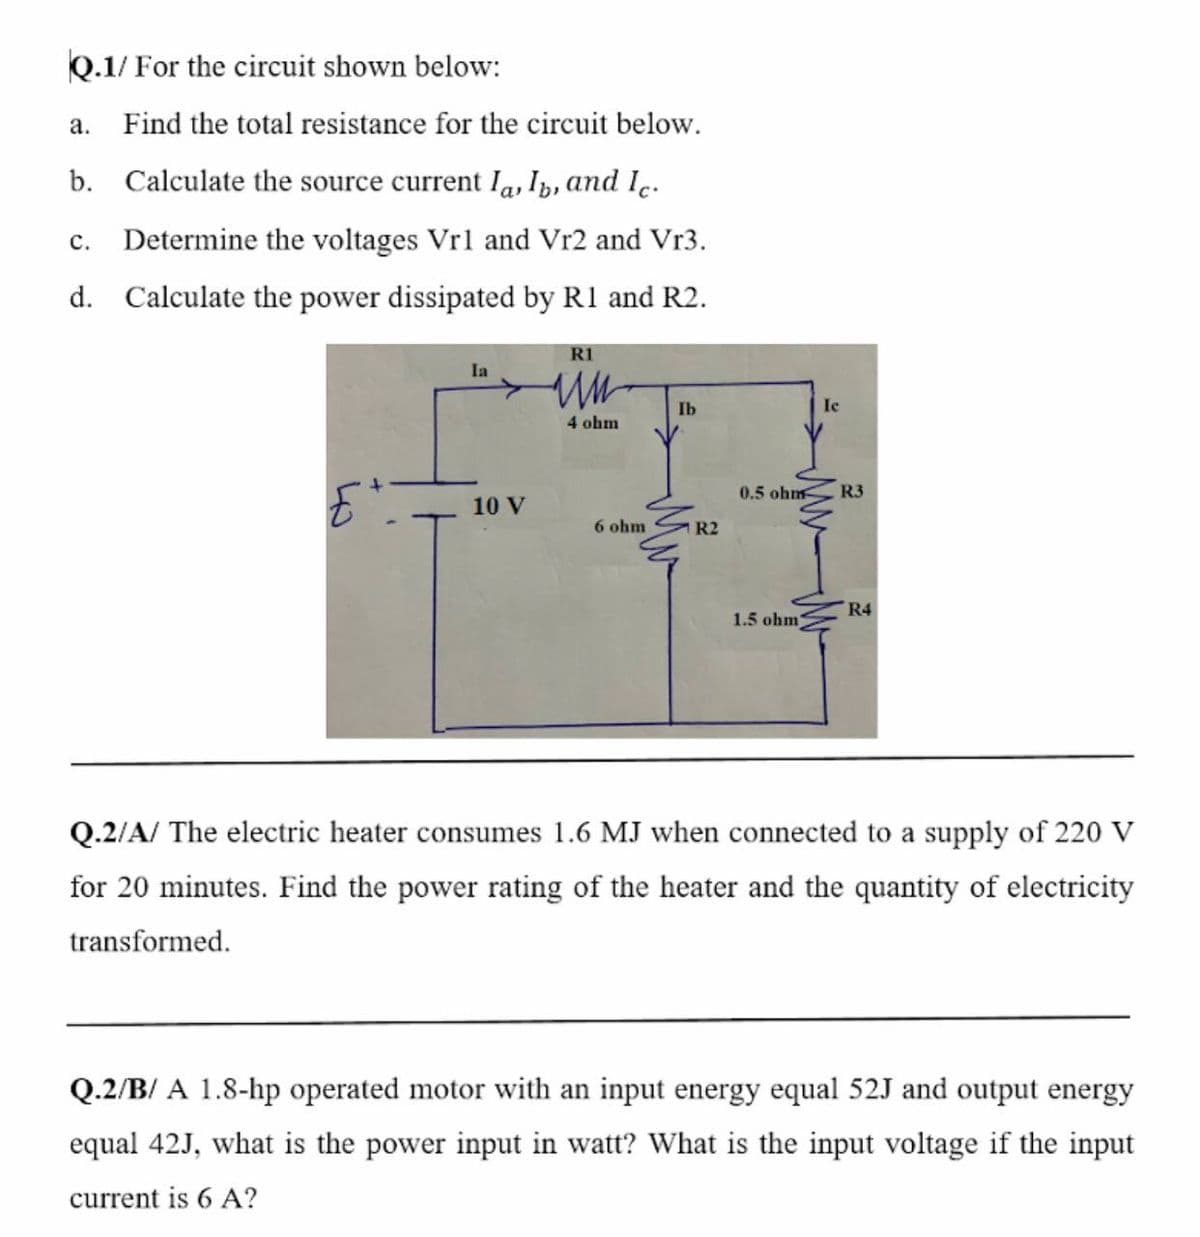 Q.1/ For the circuit shown below:
а.
Find the total resistance for the circuit below.
b. Calculate the source current Ia, Ip, and Ie.
с.
Determine the voltages Vrl and Vr2 and Vr3.
d. Calculate the power dissipated by R1 and R2.
R1
Ia
Ib
Ie
4 ohm
0.5 ohm
R3
10 V
6 ohm
1 R2
R4
1.5 ohm
Q.2/A/ The electric heater consumes 1.6 MJ when connected to a supply of 220 V
for 20 minutes. Find the power rating of the heater and the quantity of electricity
transformed.
Q.2/B/ A 1.8-hp operated motor with an input energy equal 52J and output energy
equal 42J, what is the power input in watt? What is the input voltage if the input
current is 6 A?
